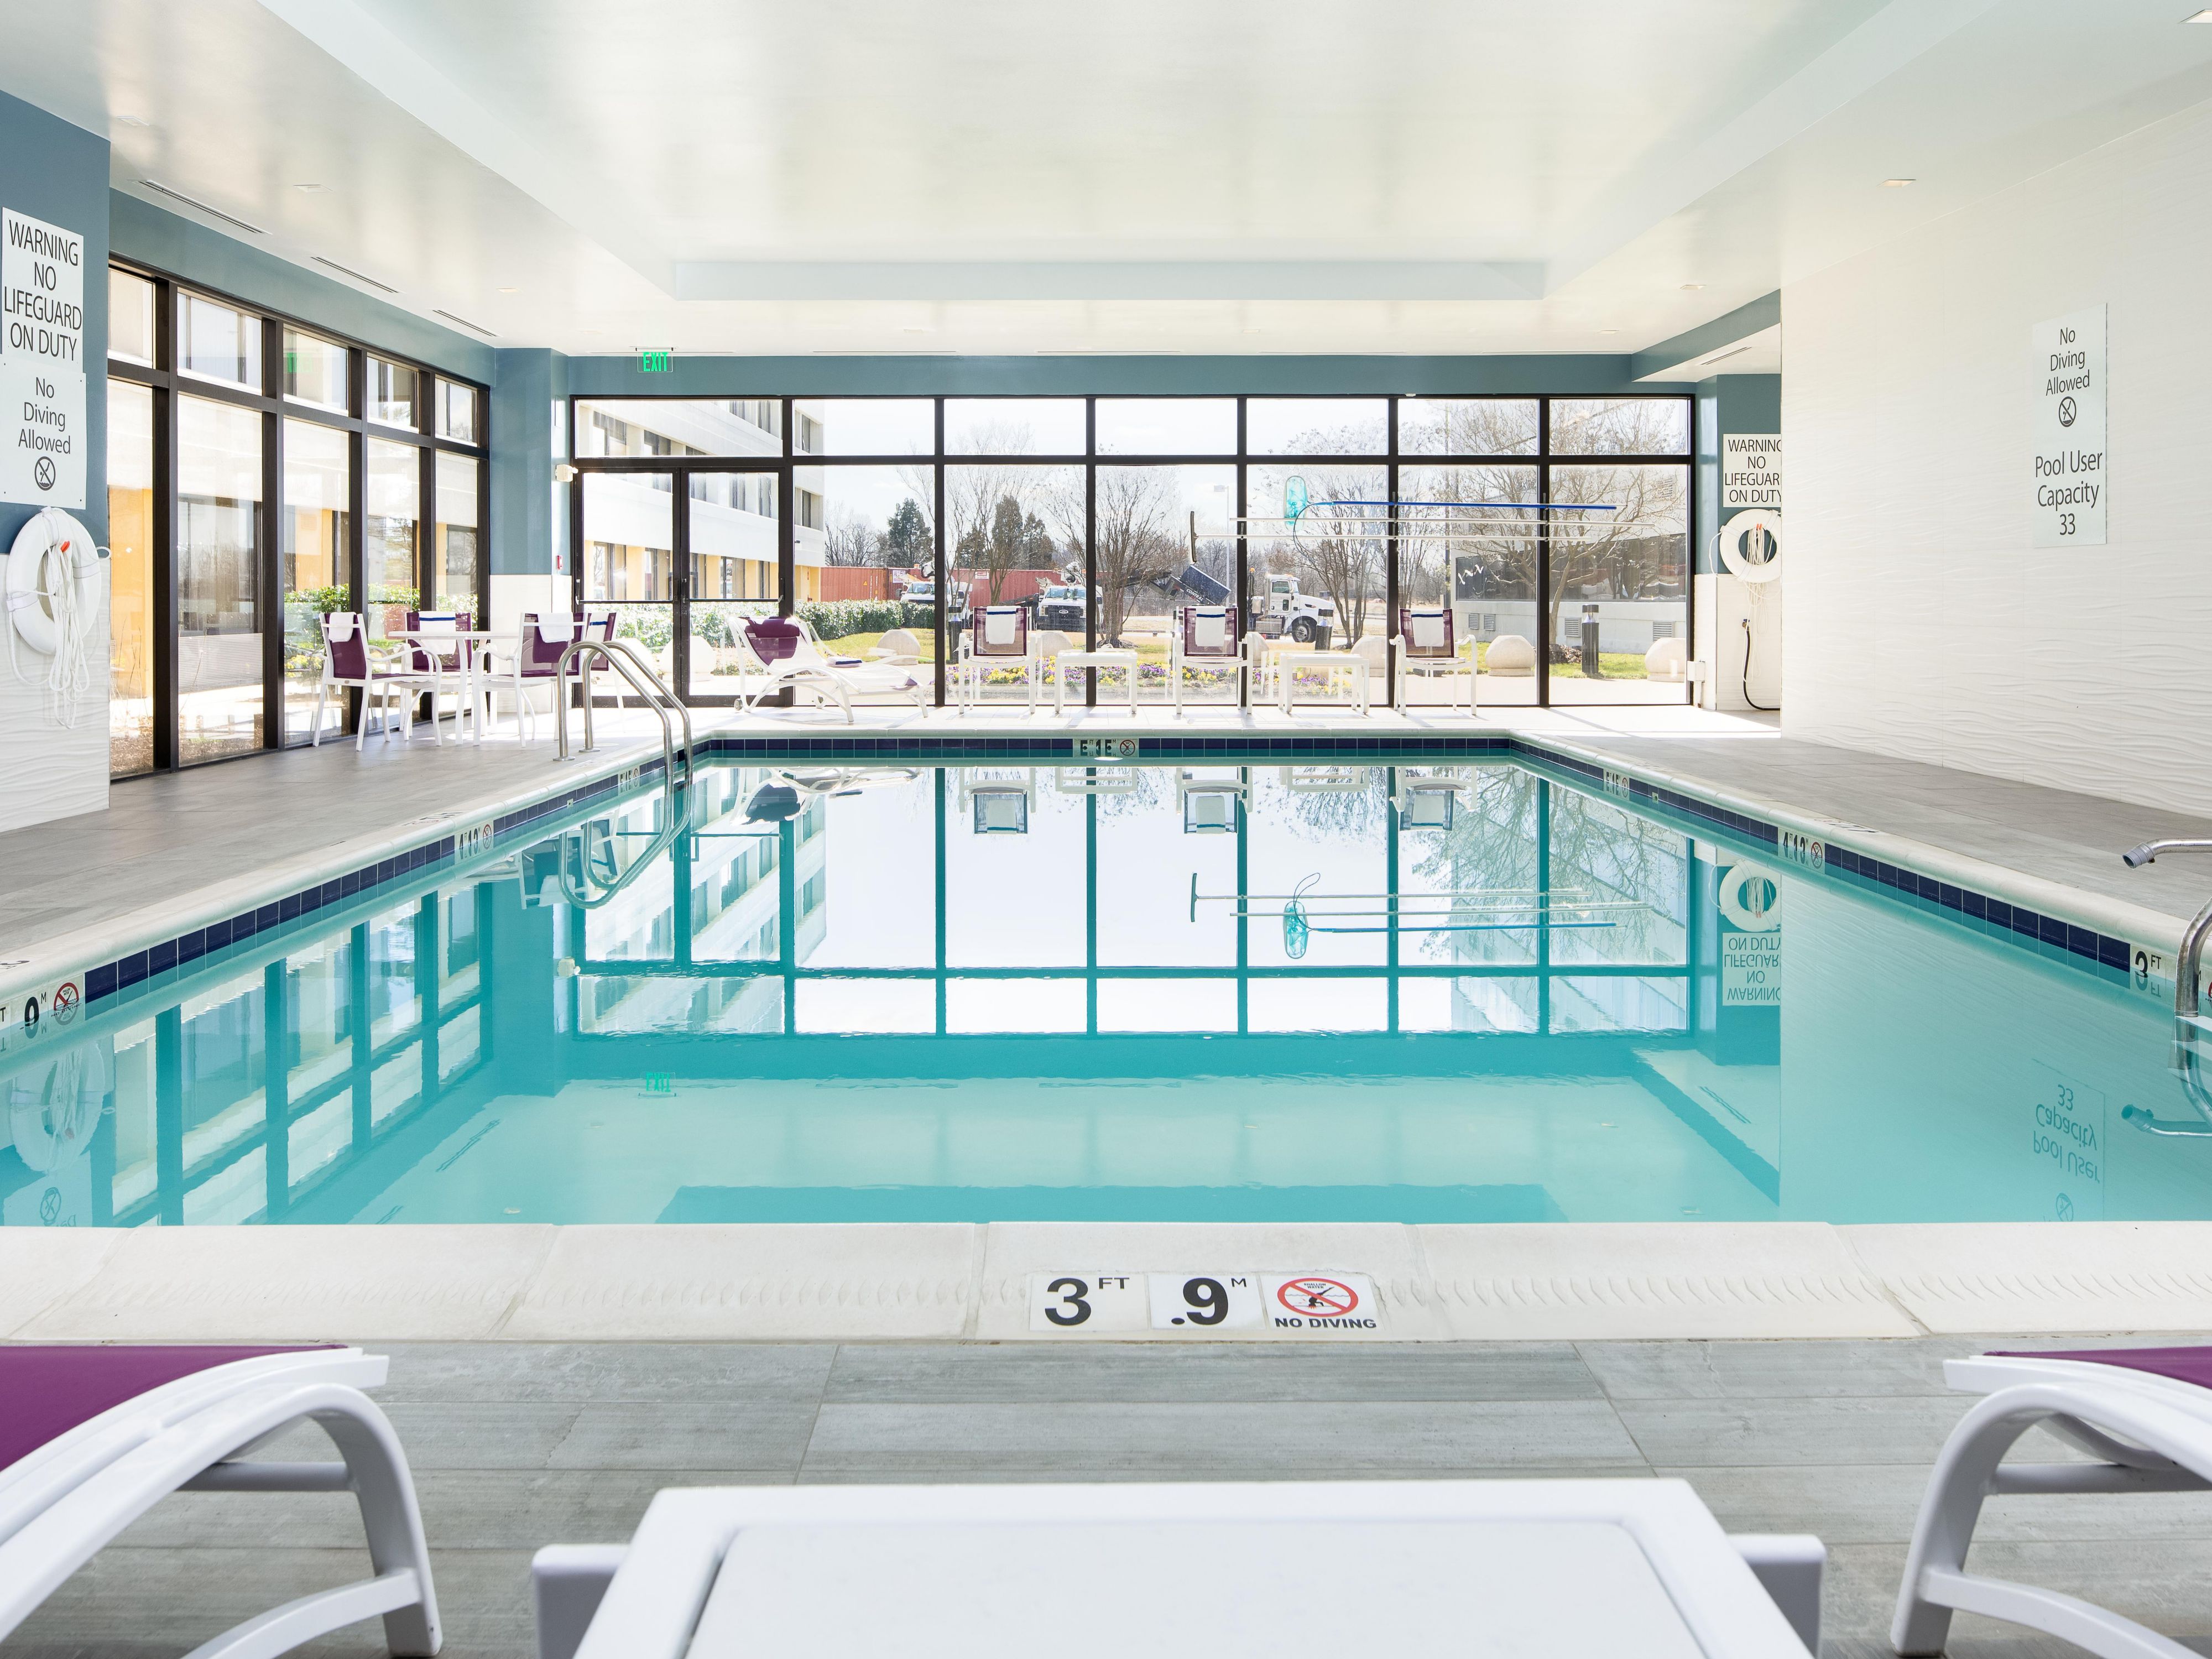 Work out in our well-equipped Fitness Center, open 24/7 with elliptical machines, stationary bikes, treadmills, and free weights. Towels, water, and sanitizer are provided. Swim laps, play with the kids, or take a relaxing dip in our indoor pool, open daily from 8:00 AM-9:00 PM. 